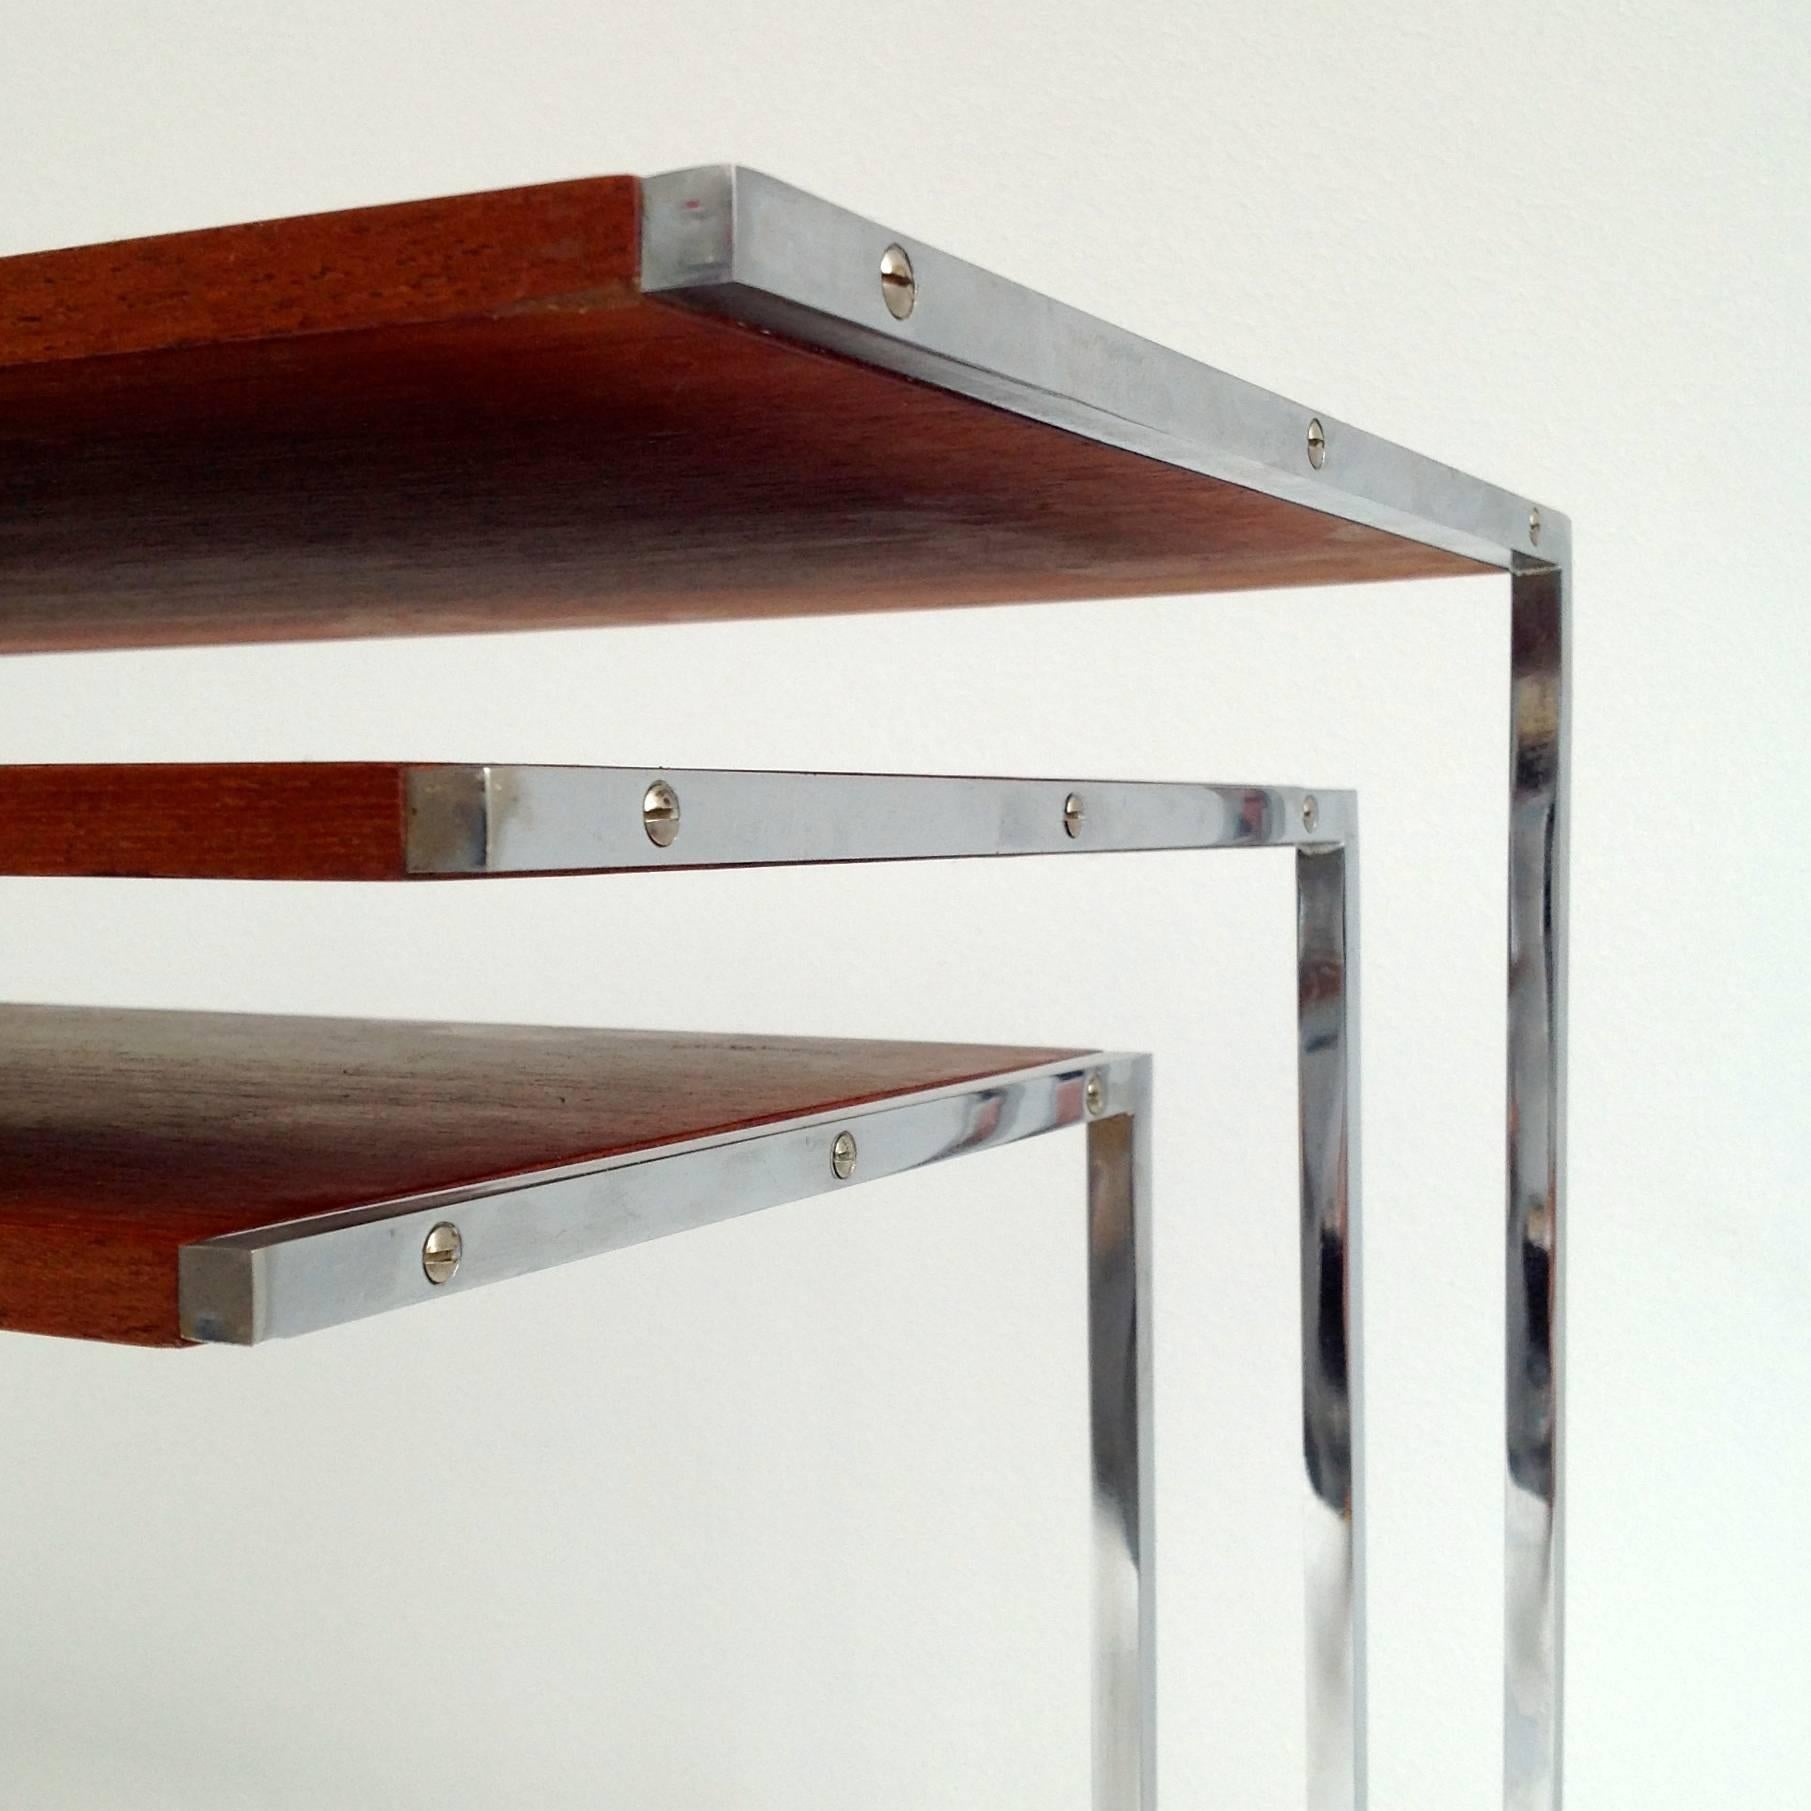 Nice iconic original design, set of three nesting tables.
Made from chrome-plated solid steel and beautiful flamed teak tablets.

Dimensions:
Small: 11.81inch (30cm) H x 12.60inch (32cm) W x 9.84inch (25cm) D.
Middle: 13.78inch (35cm) H x